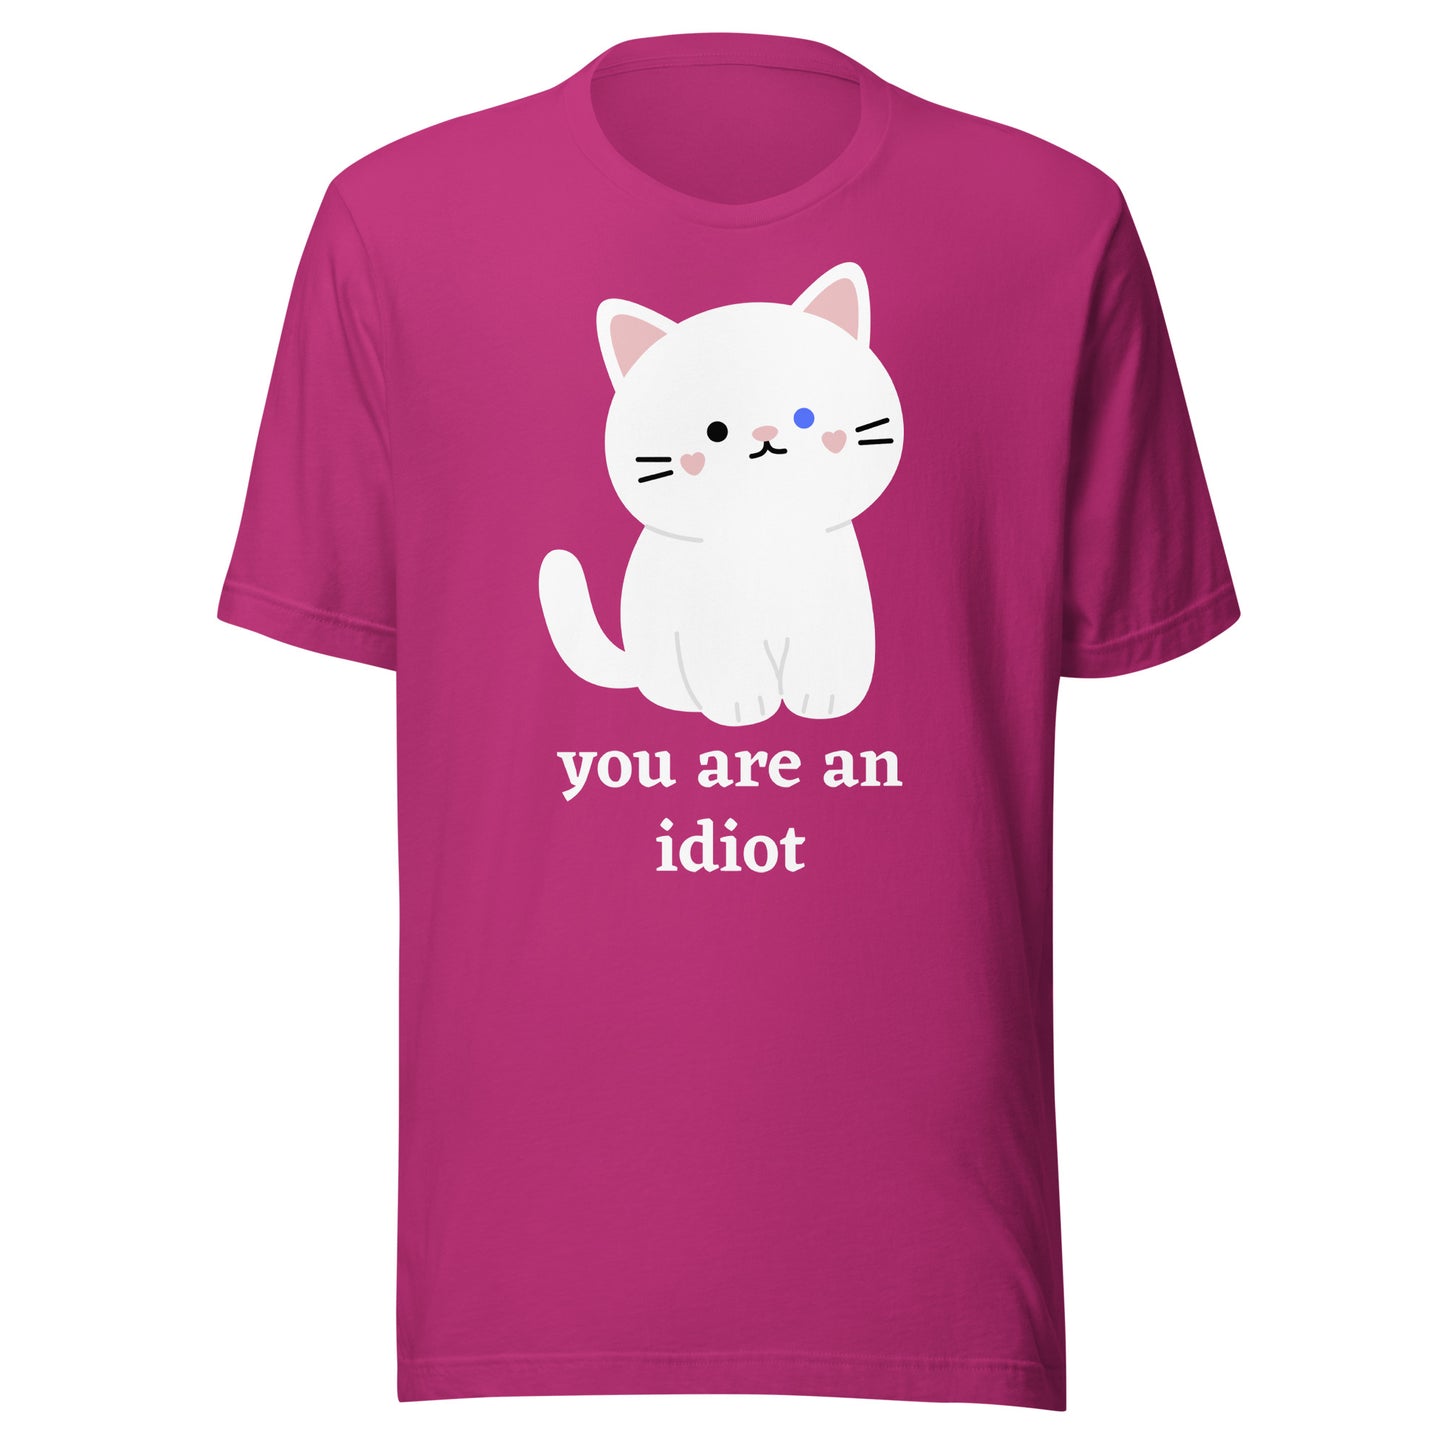 "You are an idiot" Cat - Unisex t-shirt